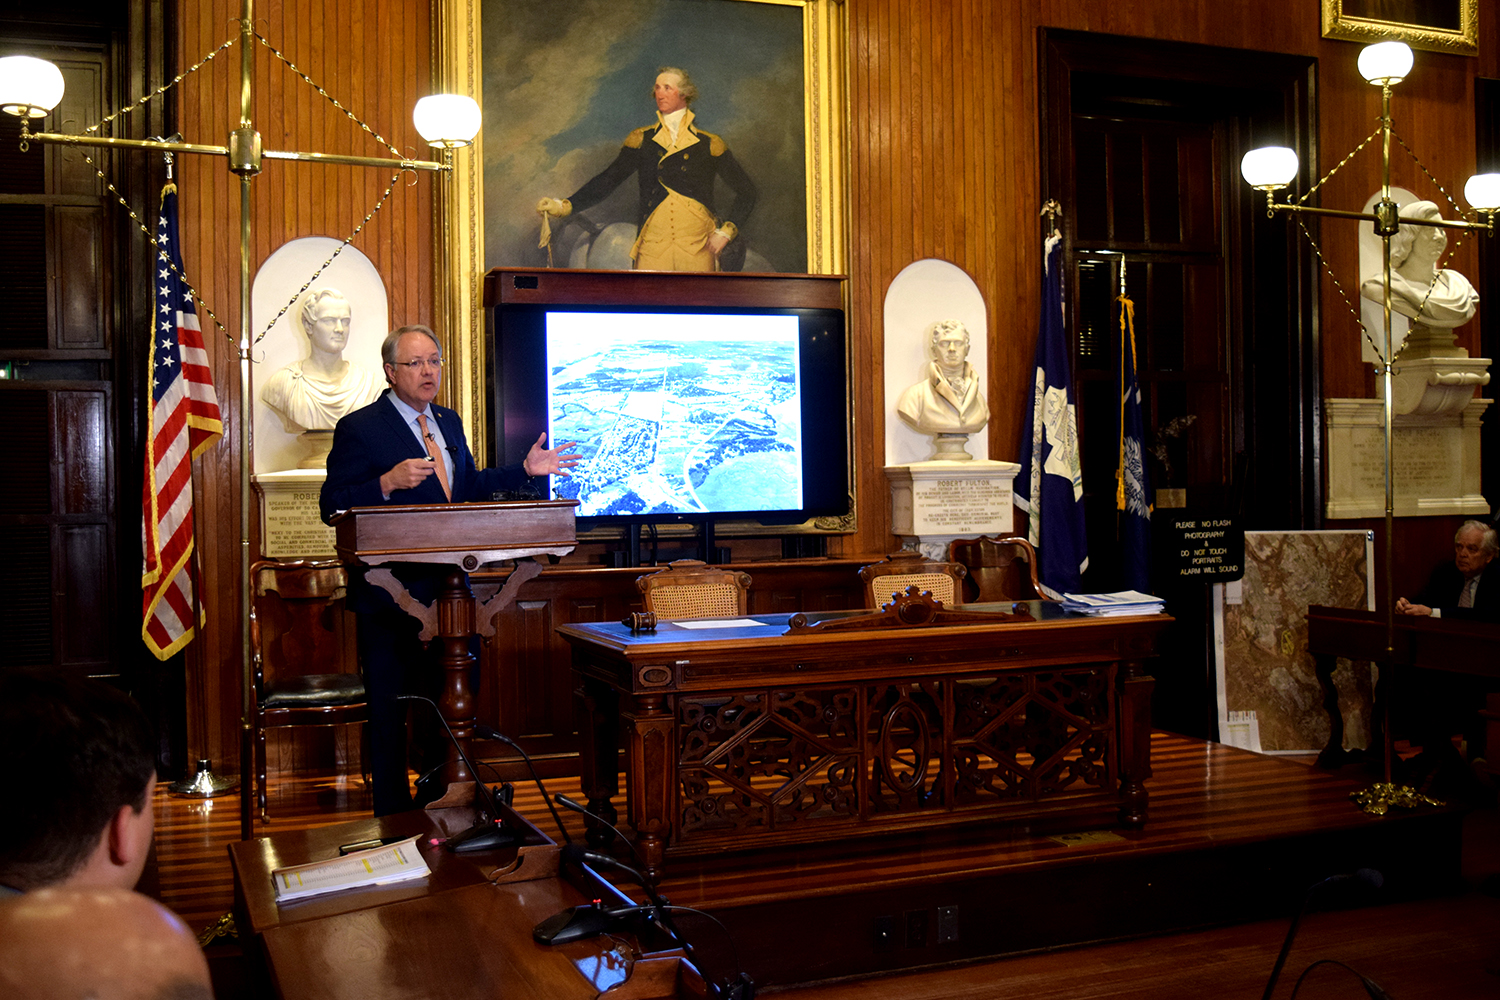 Charleston Mayor John Tecklenburg dedicated the majority of his State of the City address to presenting a strategic plan for dealing with flooding across the city. (Photo/Patrick Hoff)